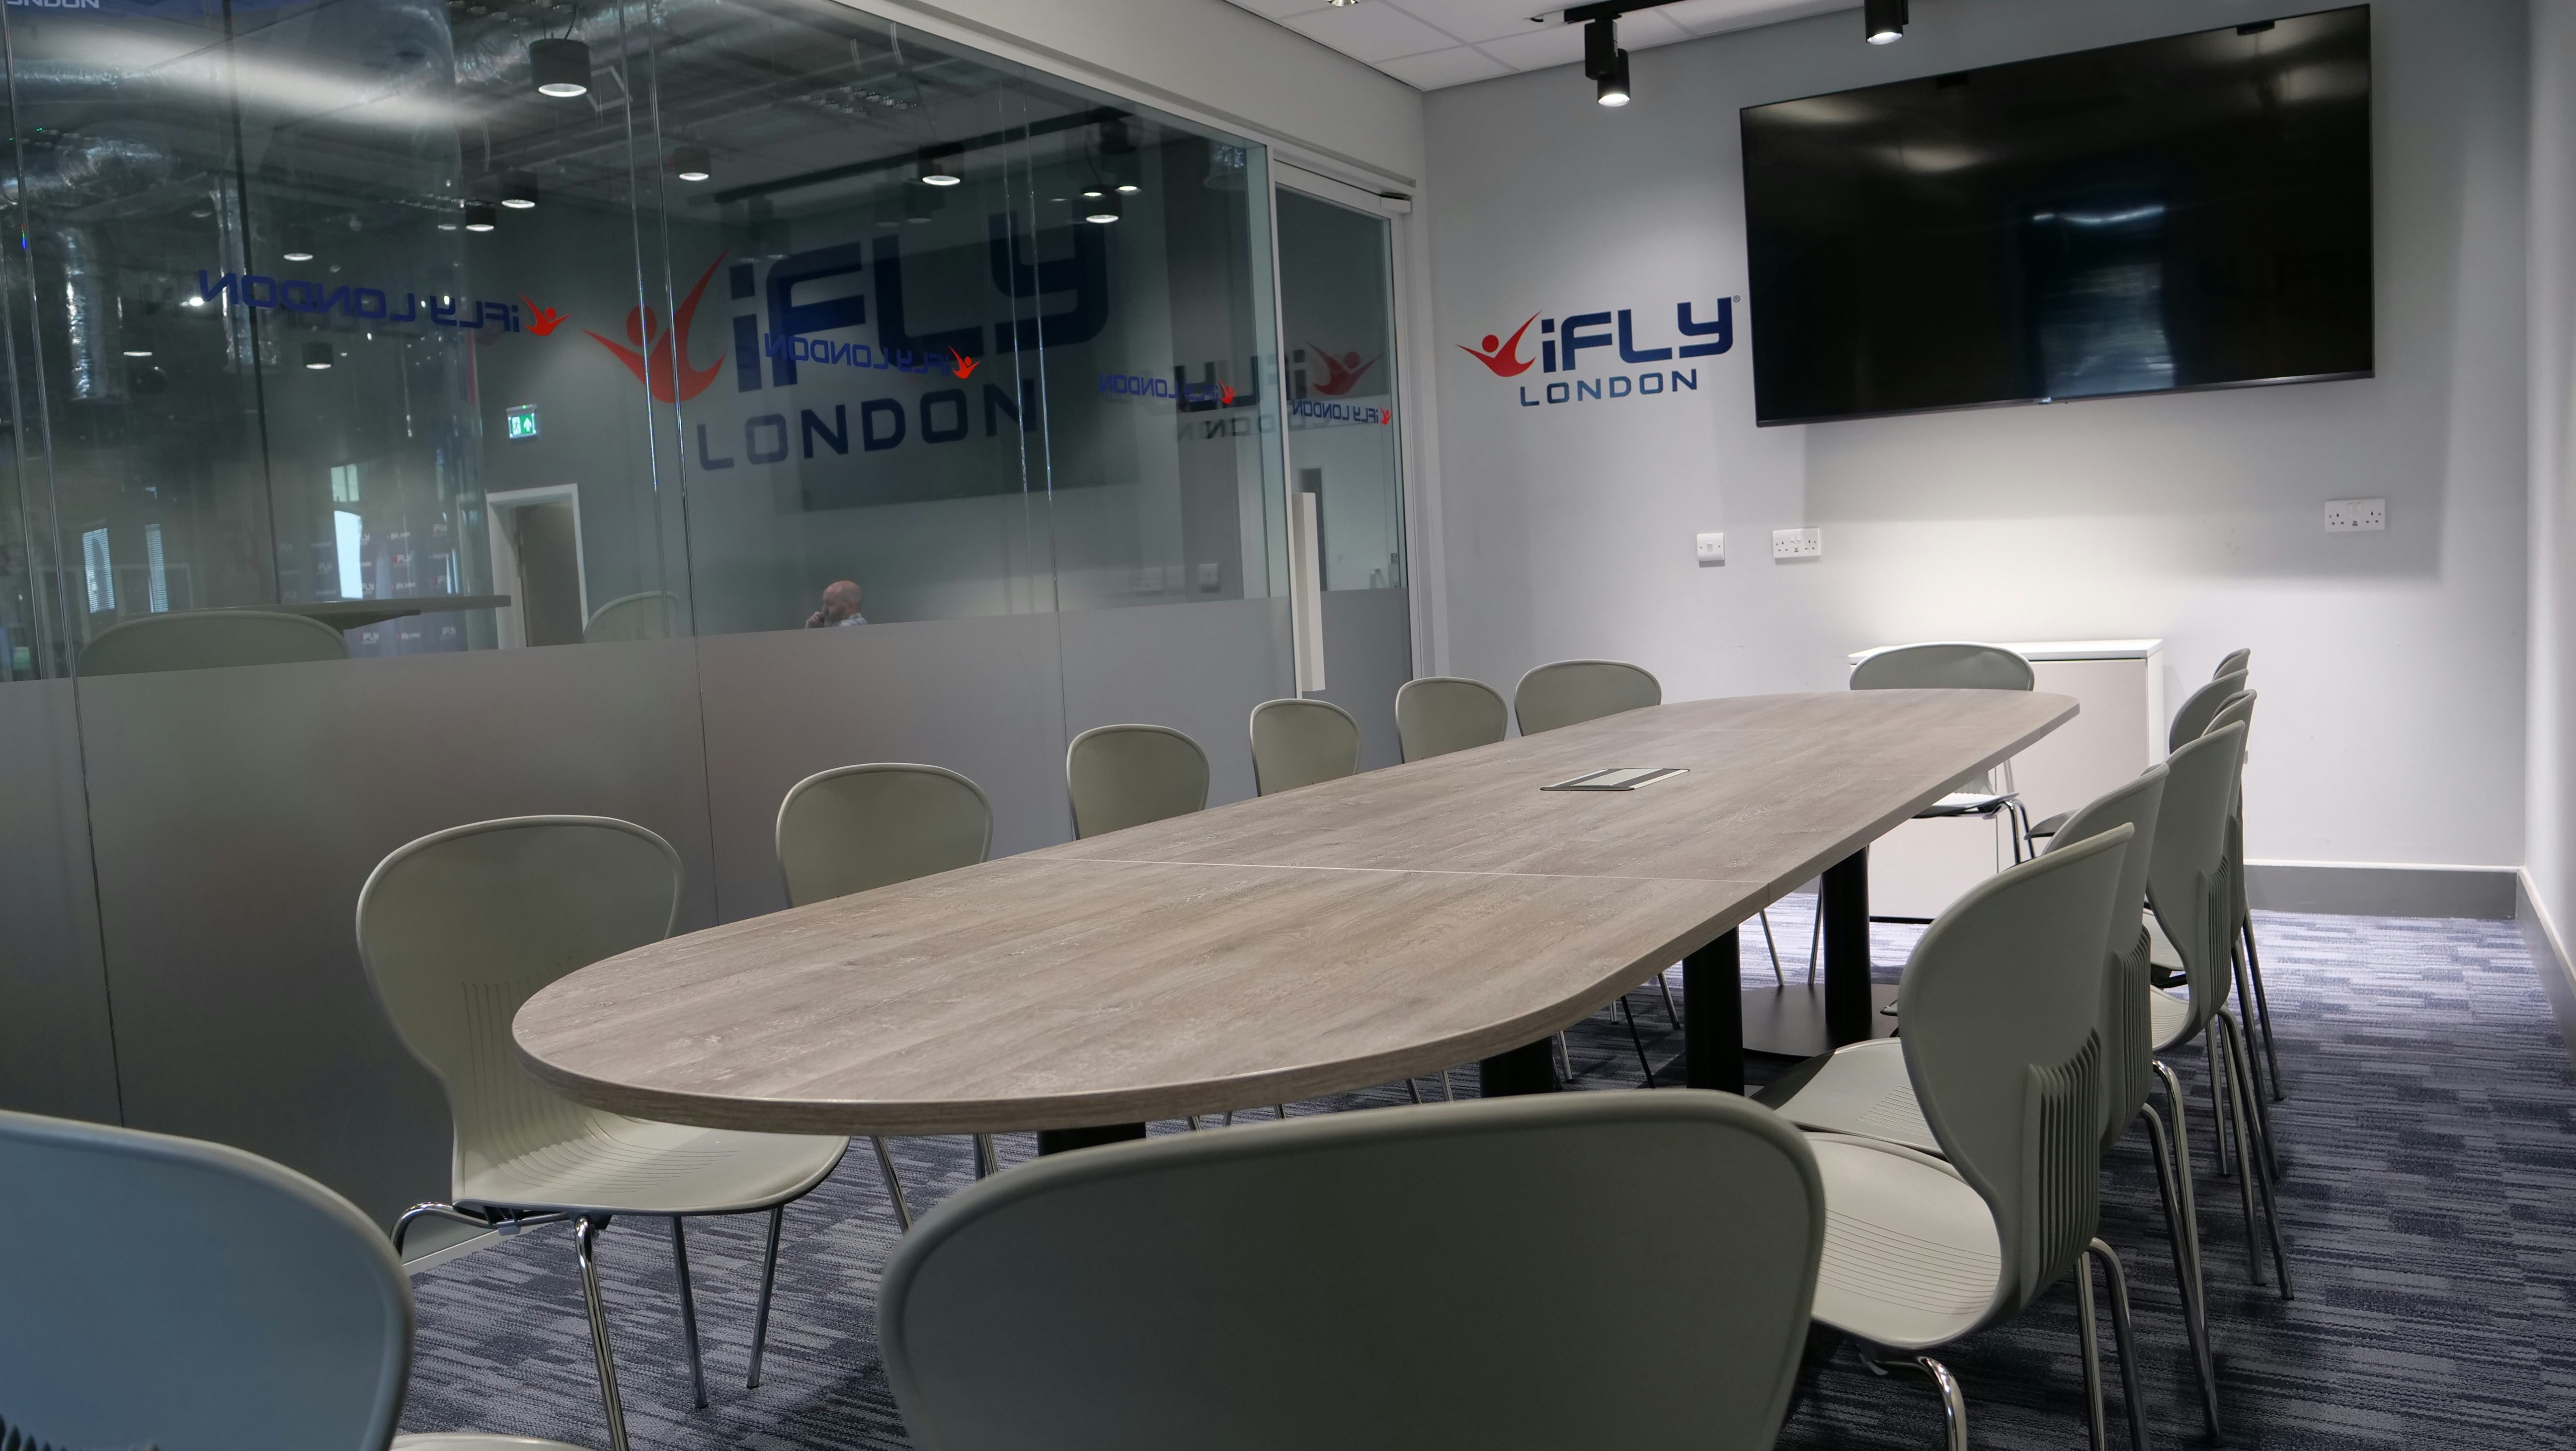 iFLY Indoor Skydiving at The O2 - Conference Room image 3